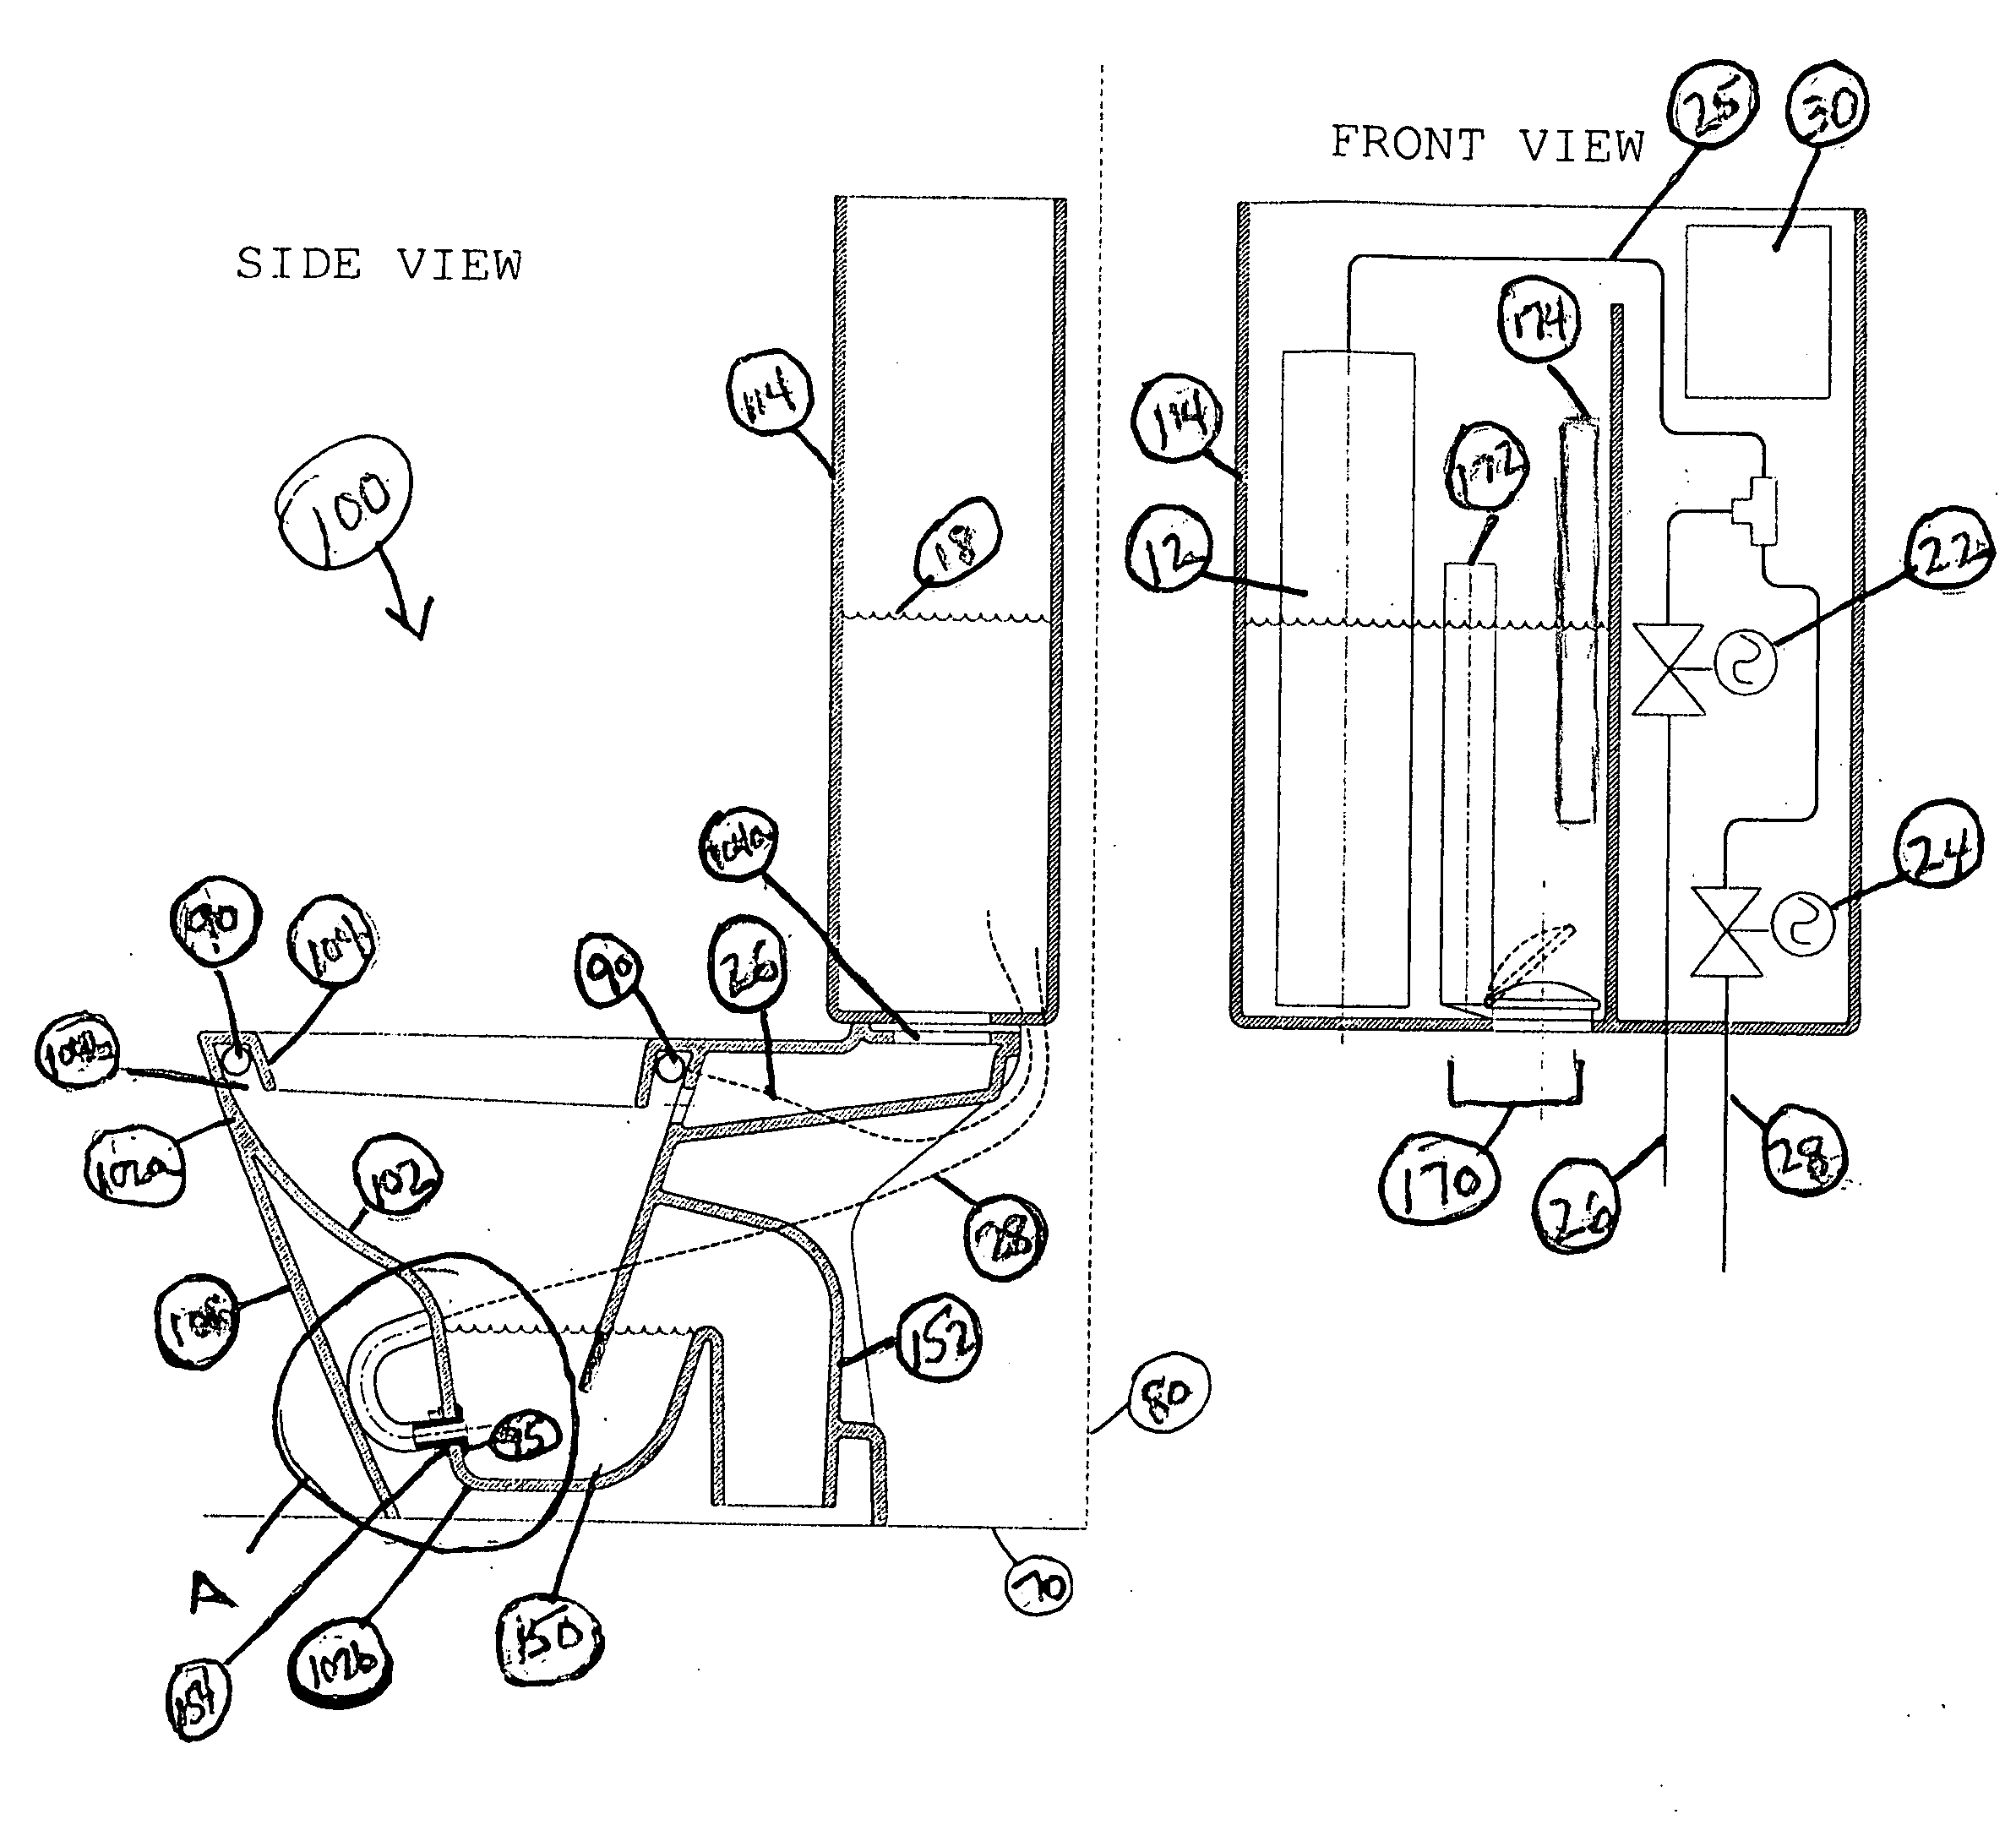 Method of operating a multi-phase, high energy flushing system for optimal waste removal and bowl cleaning within a prescribed water consumption range